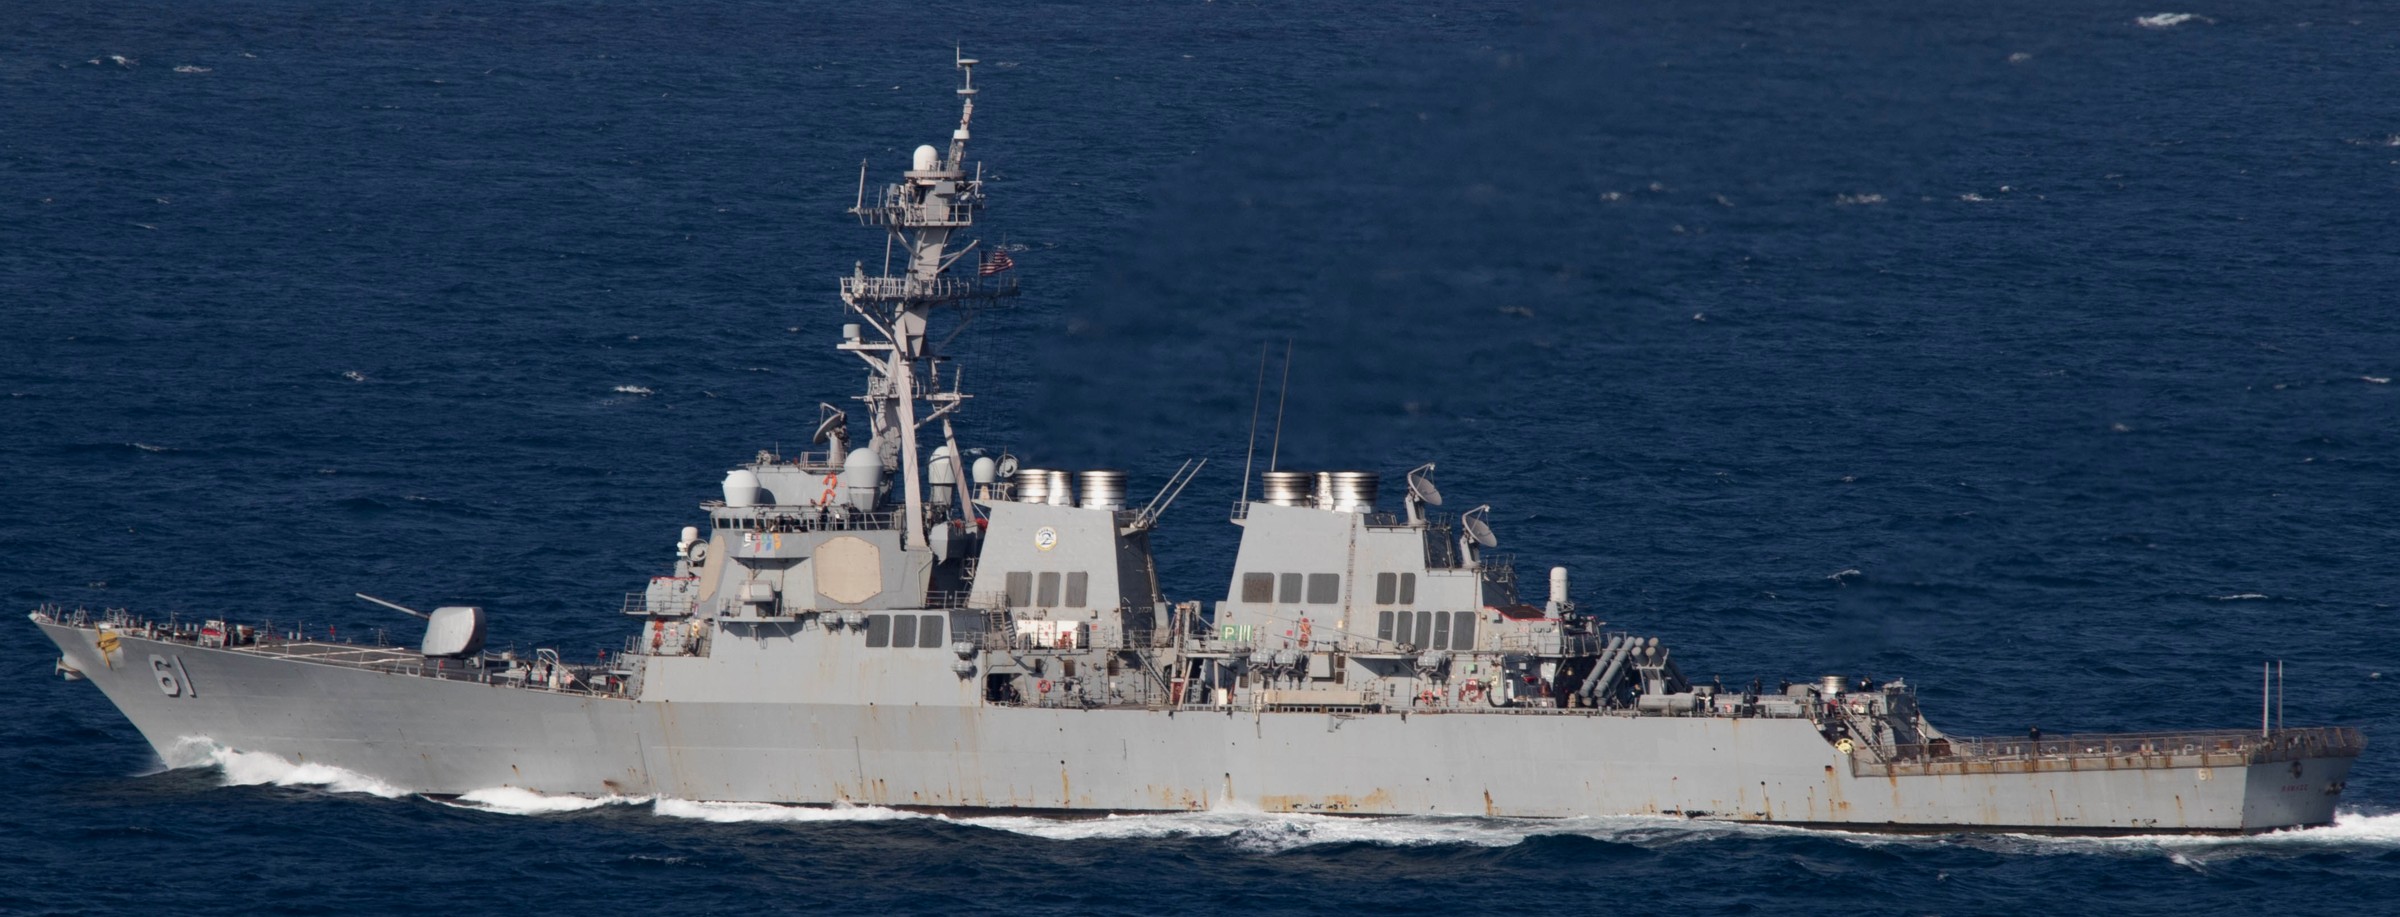 ddg-61 uss ramage guided missile destroyer arleigh burke class aegis us navy 105